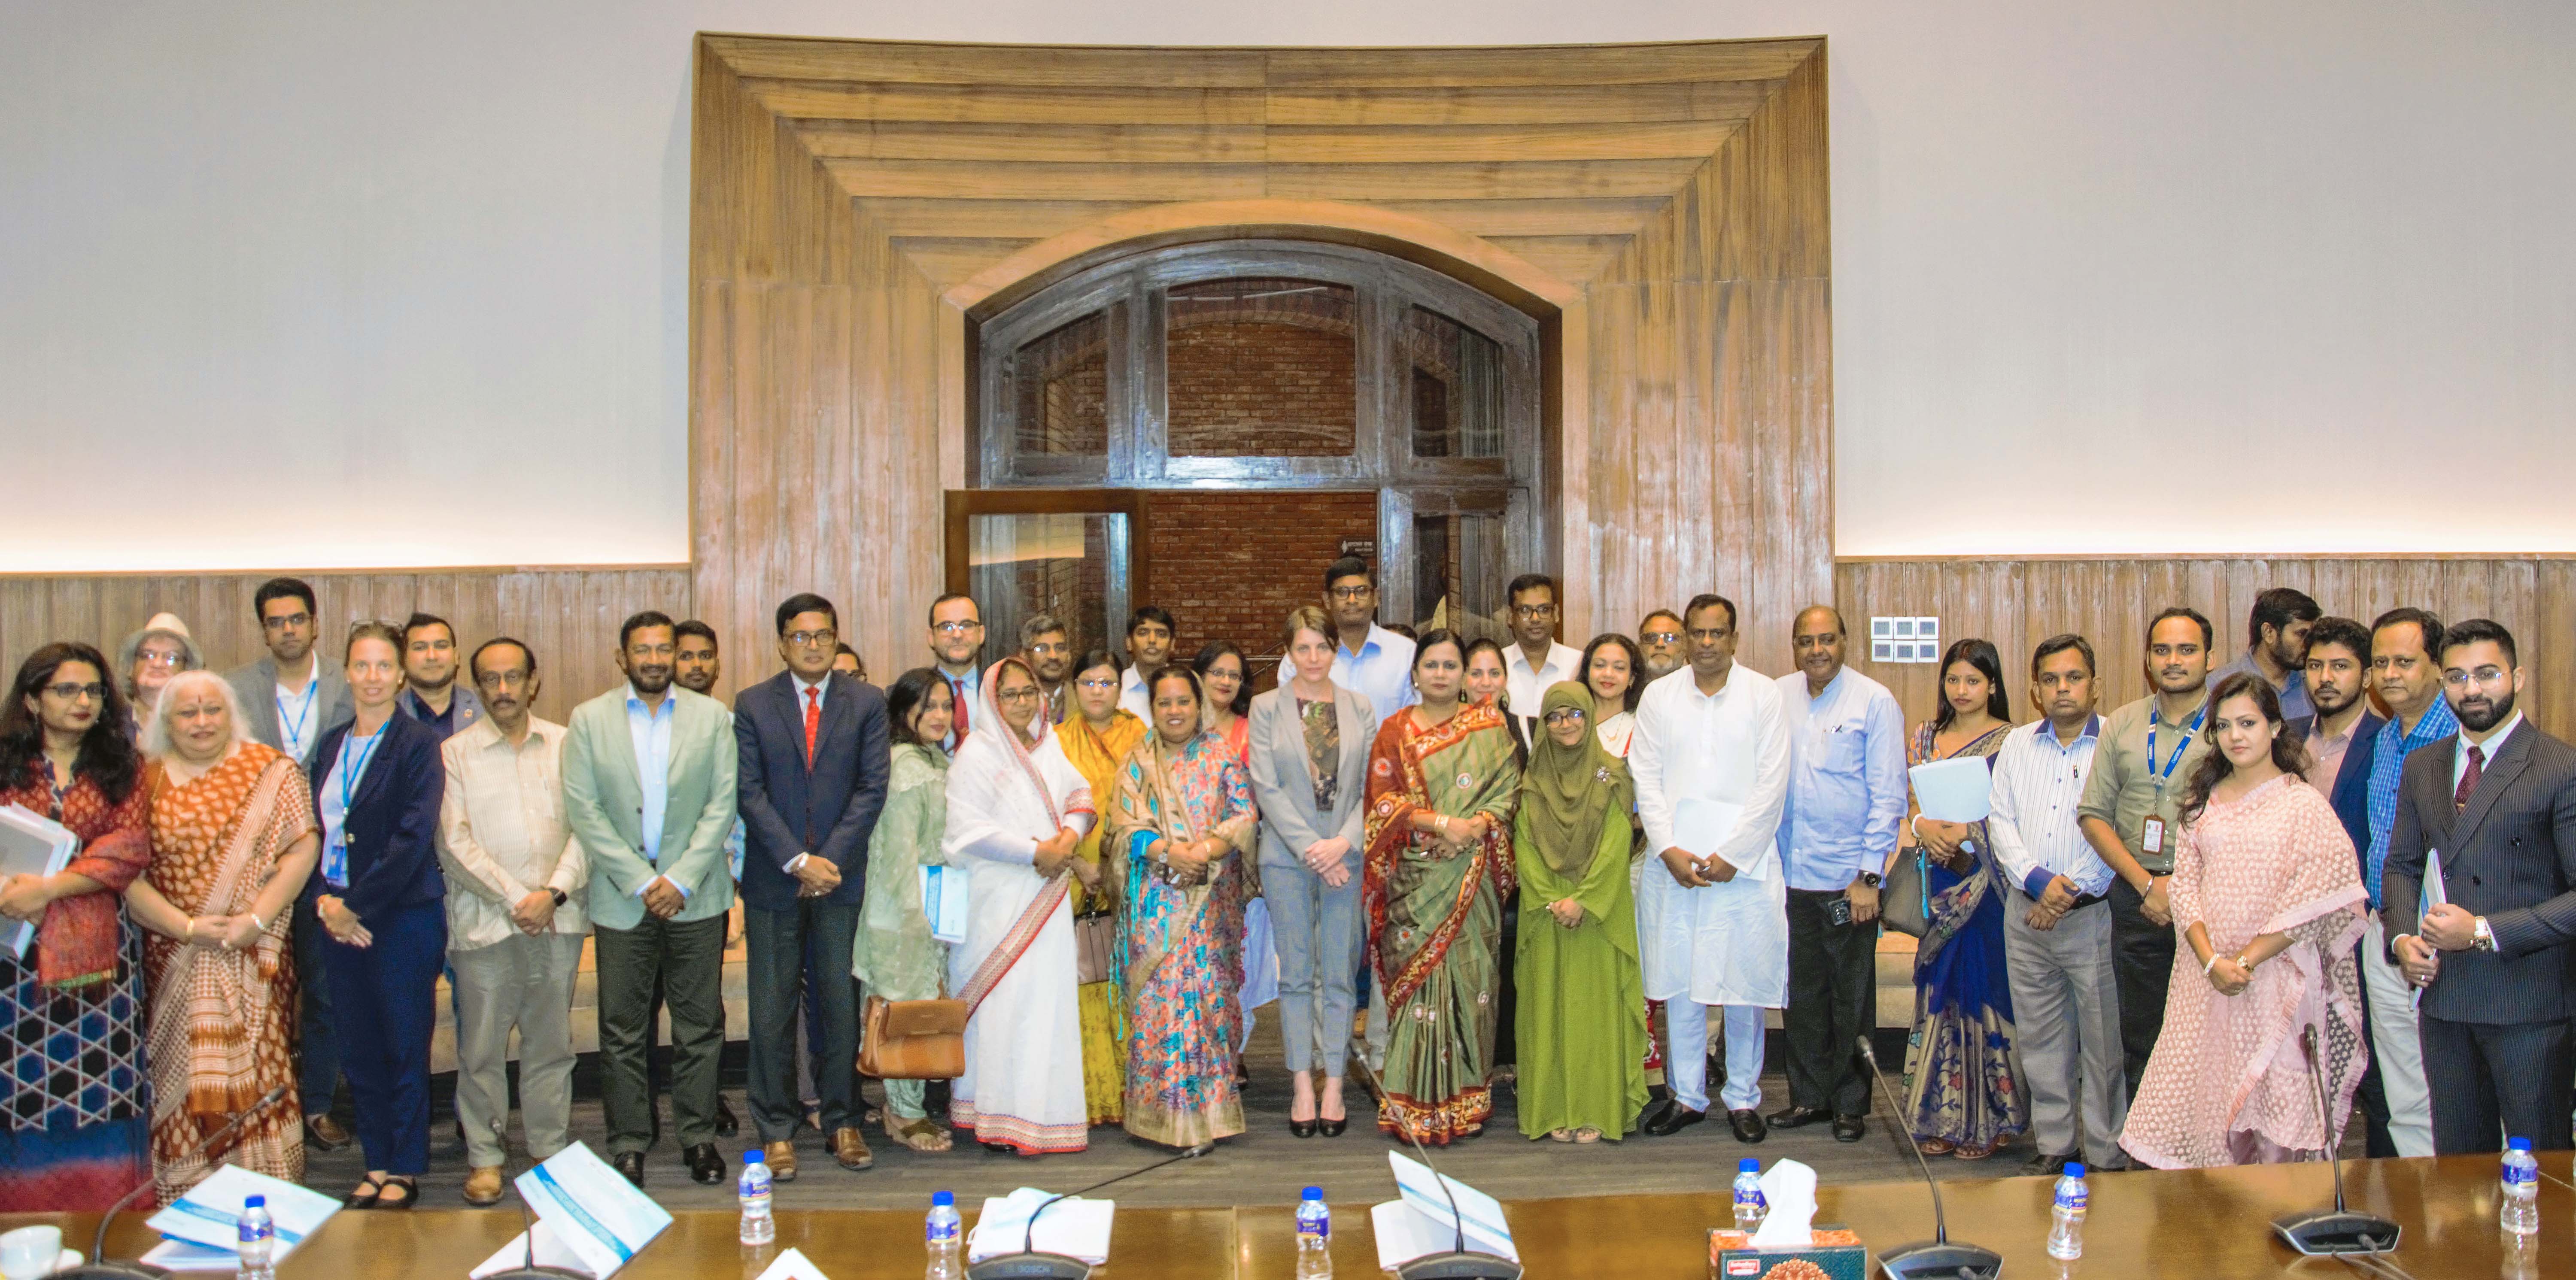 Members of the Bangladesh Parliamentarians’ Caucus on Migration and Development and civil society organizations were participants in the discussions and echoed the calls for immediate action. 